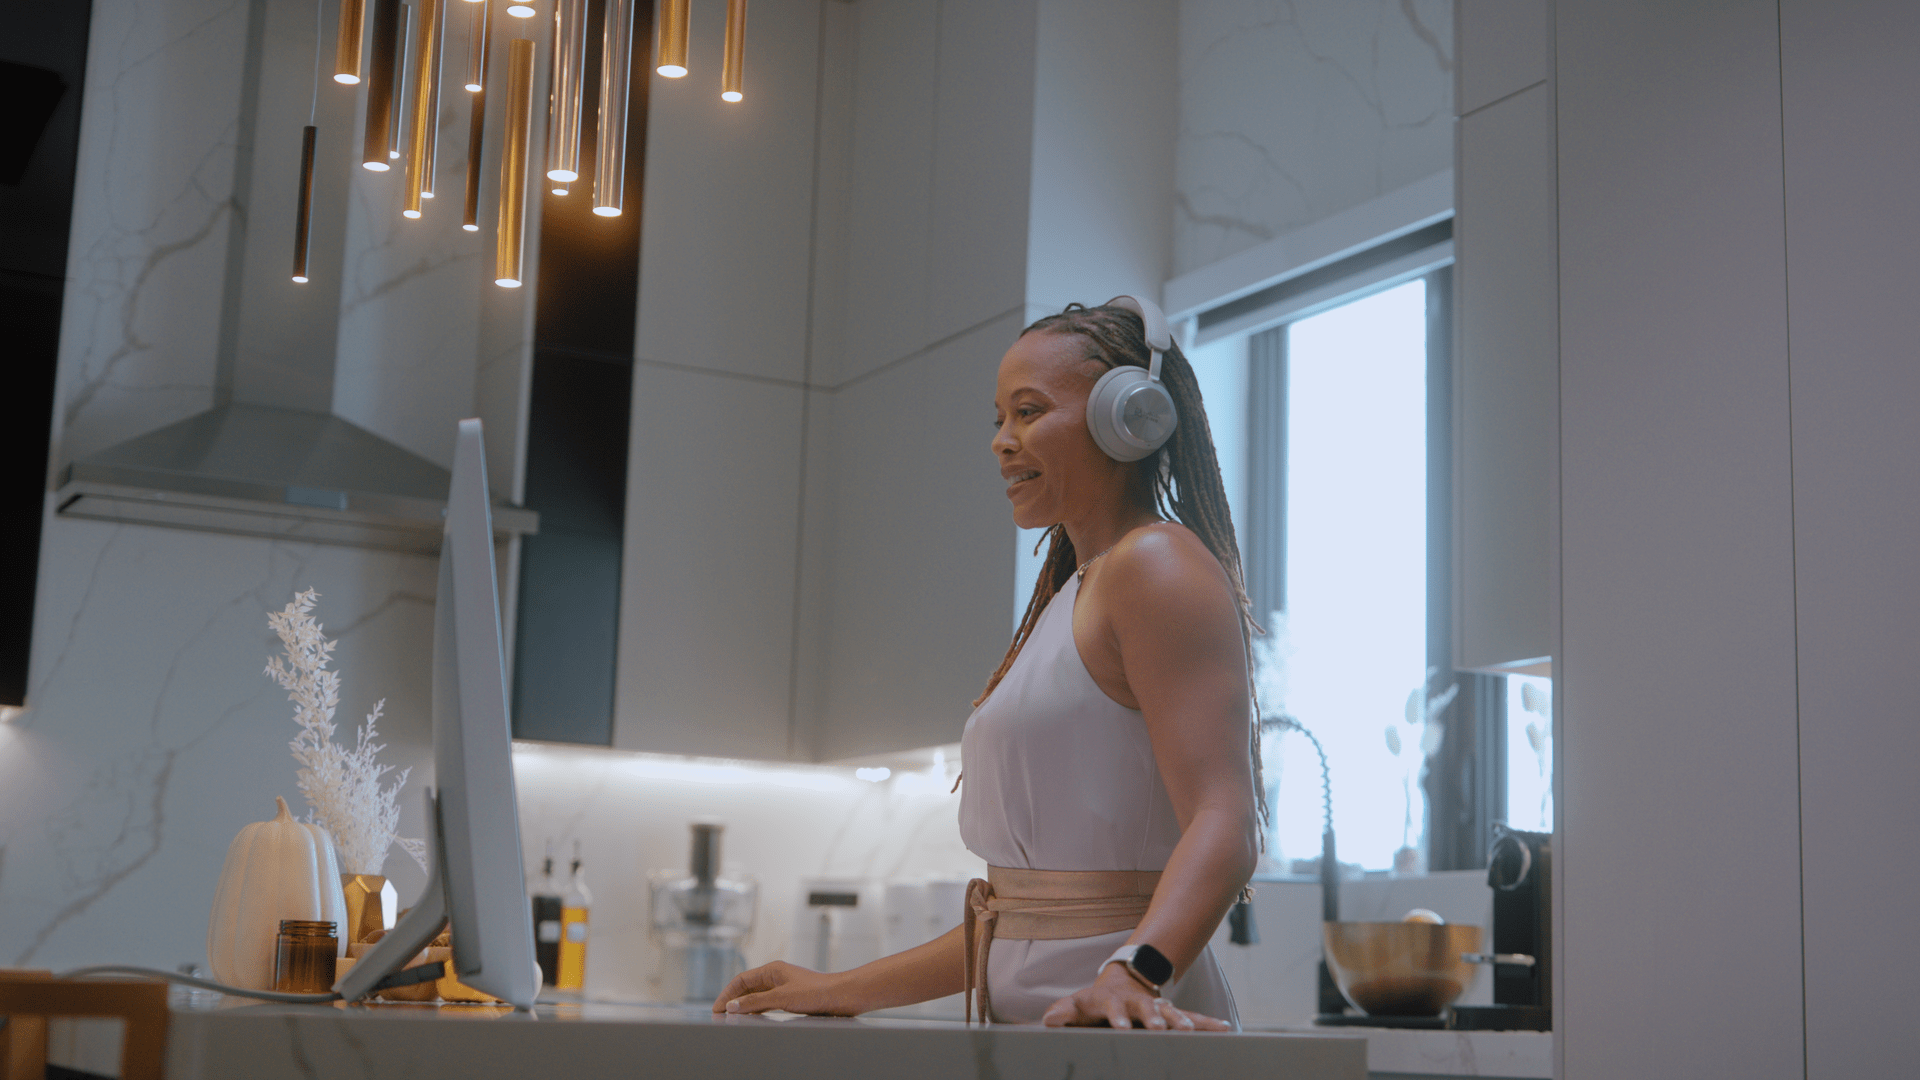 New Bang & Olufsen and Cisco Premium Business Headset Targets Hybrid Workforce